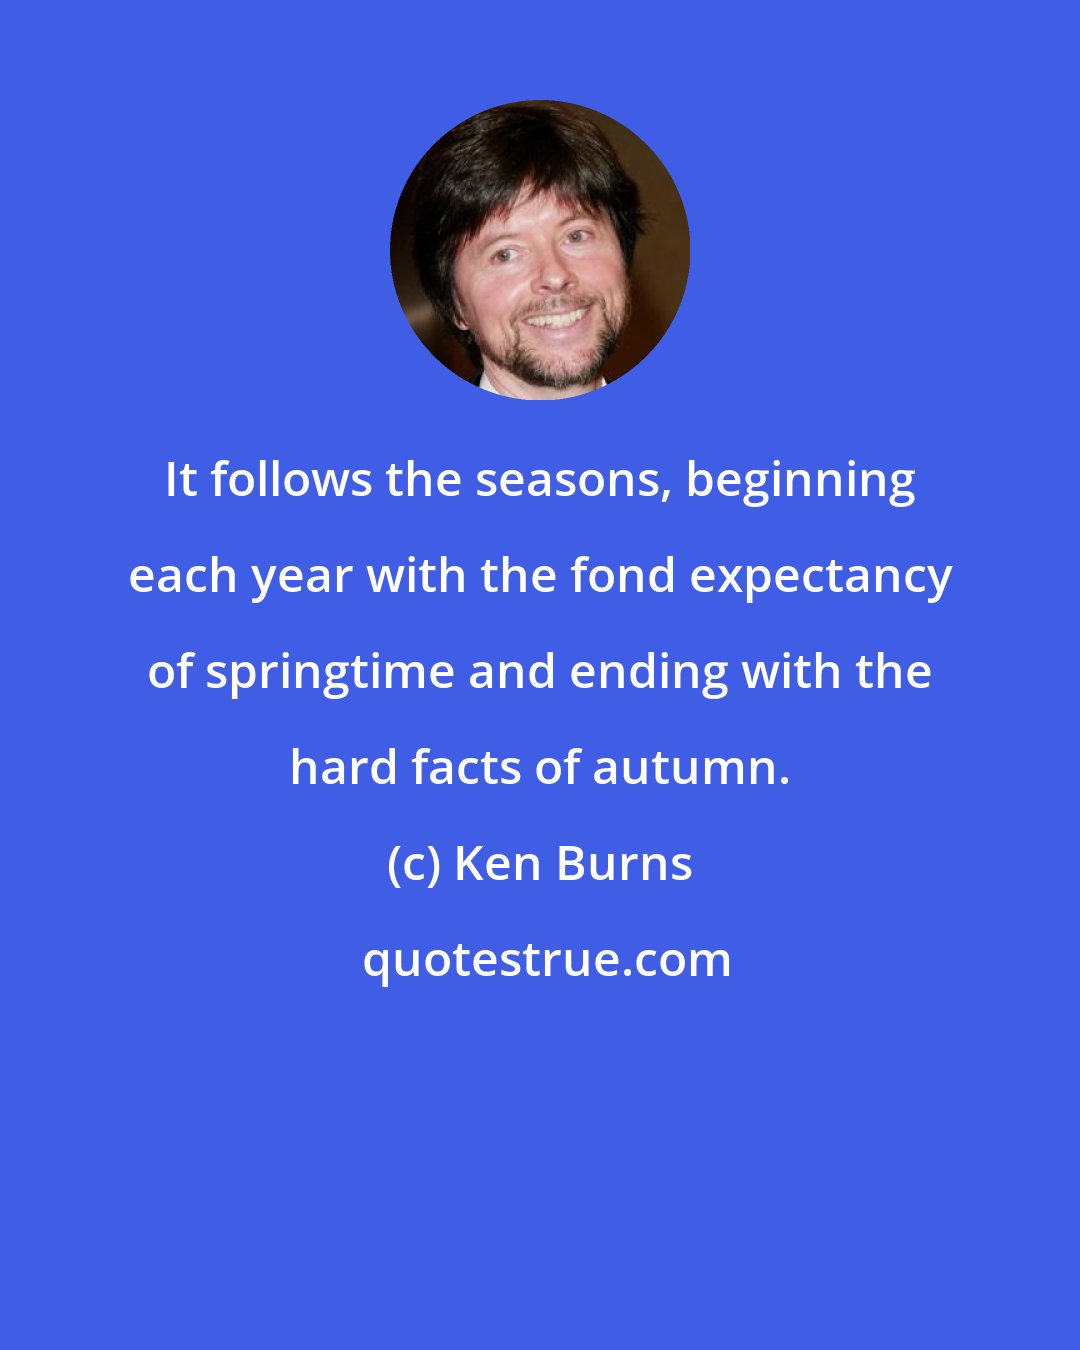 Ken Burns: It follows the seasons, beginning each year with the fond expectancy of springtime and ending with the hard facts of autumn.